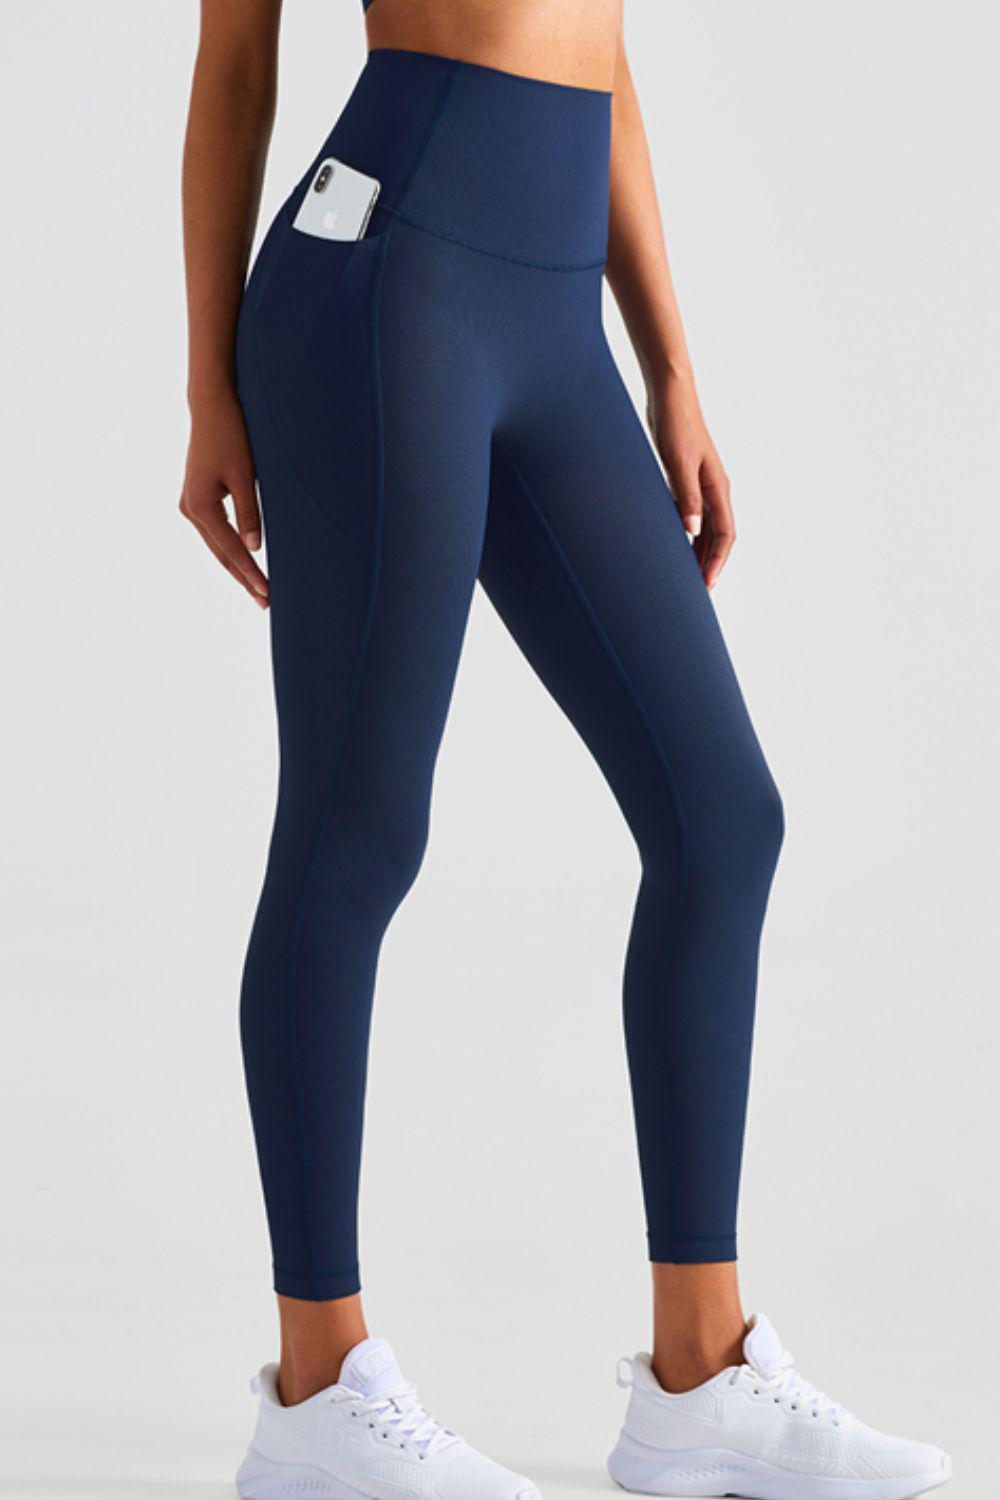 Soft and Breathable High-Waisted Yoga Leggings-BOTTOM SIZES SMALL MEDIUM LARGE-[Adult]-[Female]-Navy-4-2022 Online Blue Zone Planet